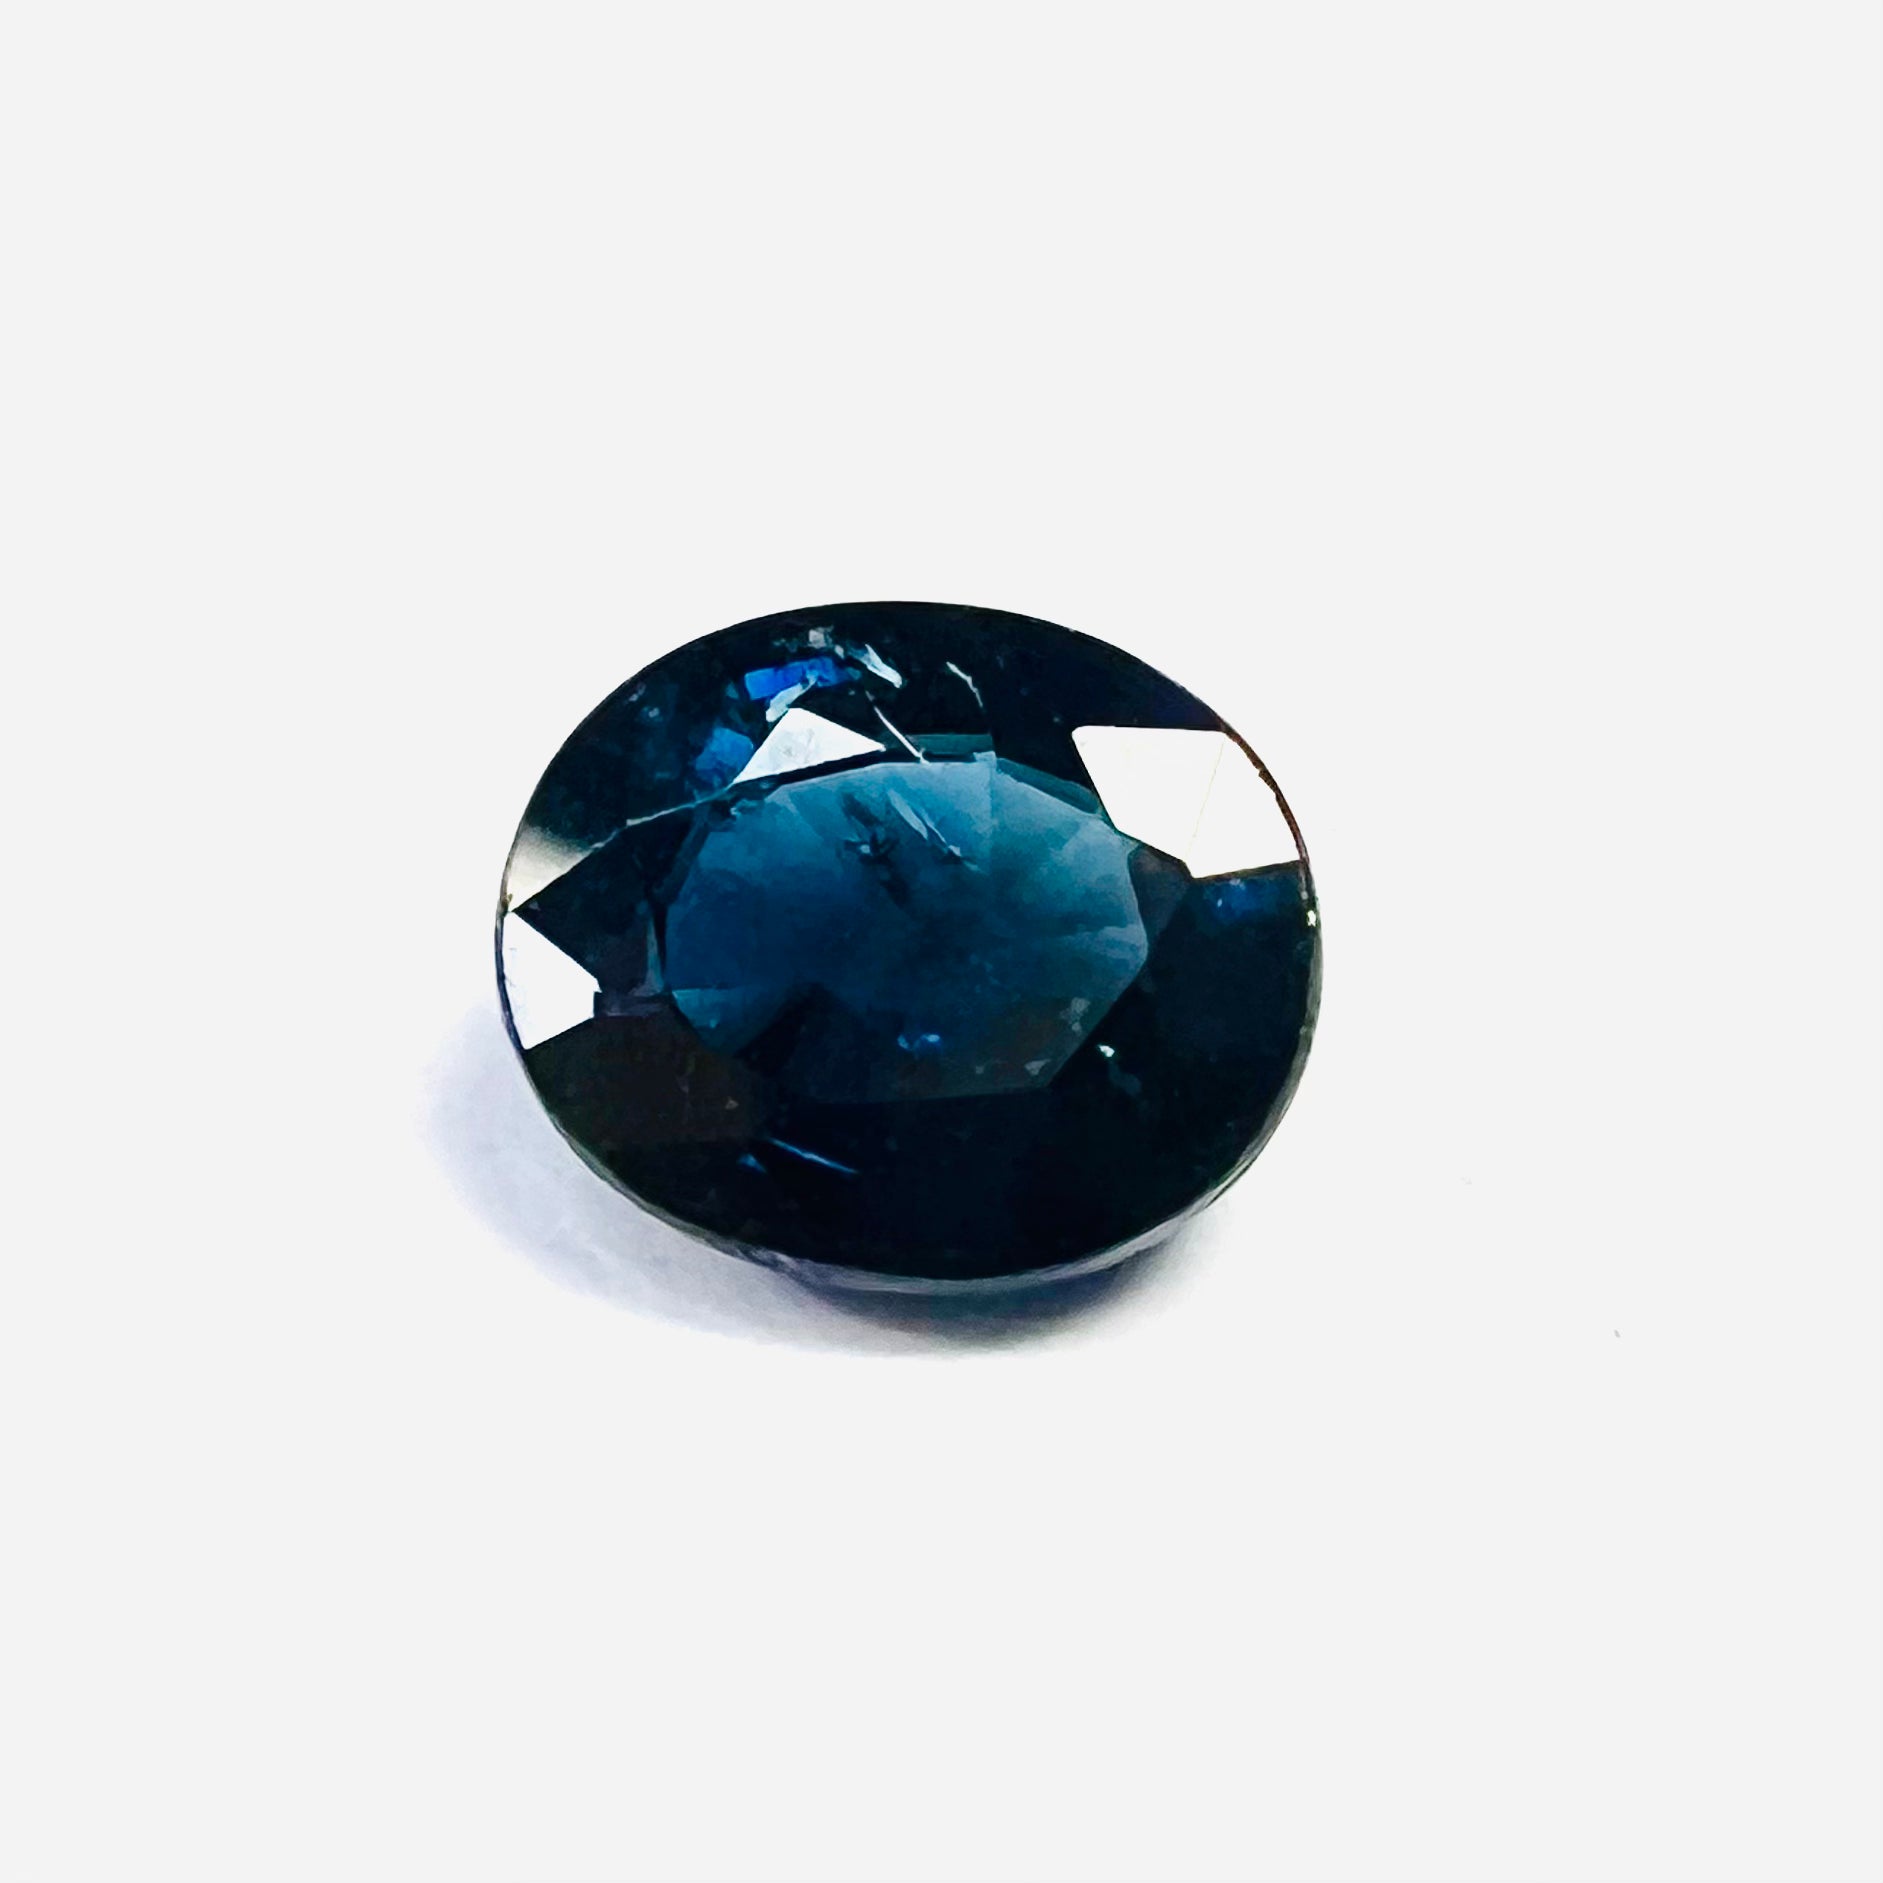 .80CT Loose Oval Blue Sapphire 6.01x5.03x3.01mm Earth mined Gemstone